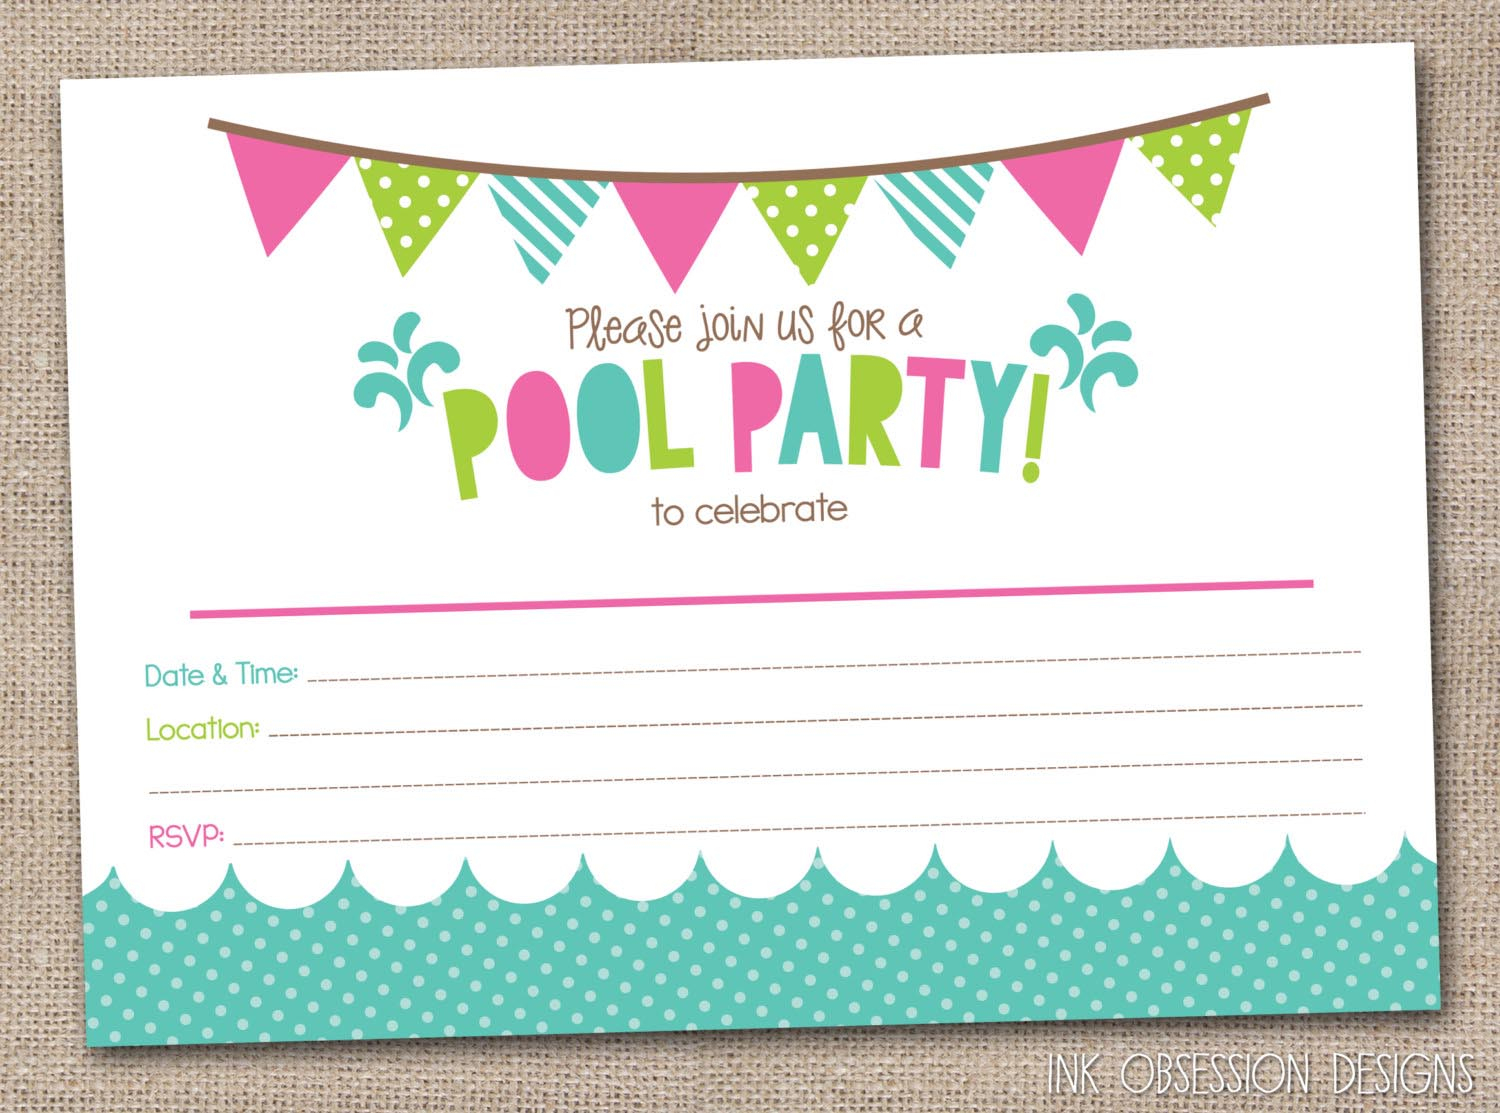 Free Printable Pool Party Birthday Invitations | Backyard Design Ideas - Free Printable Pool Party Invitation Cards